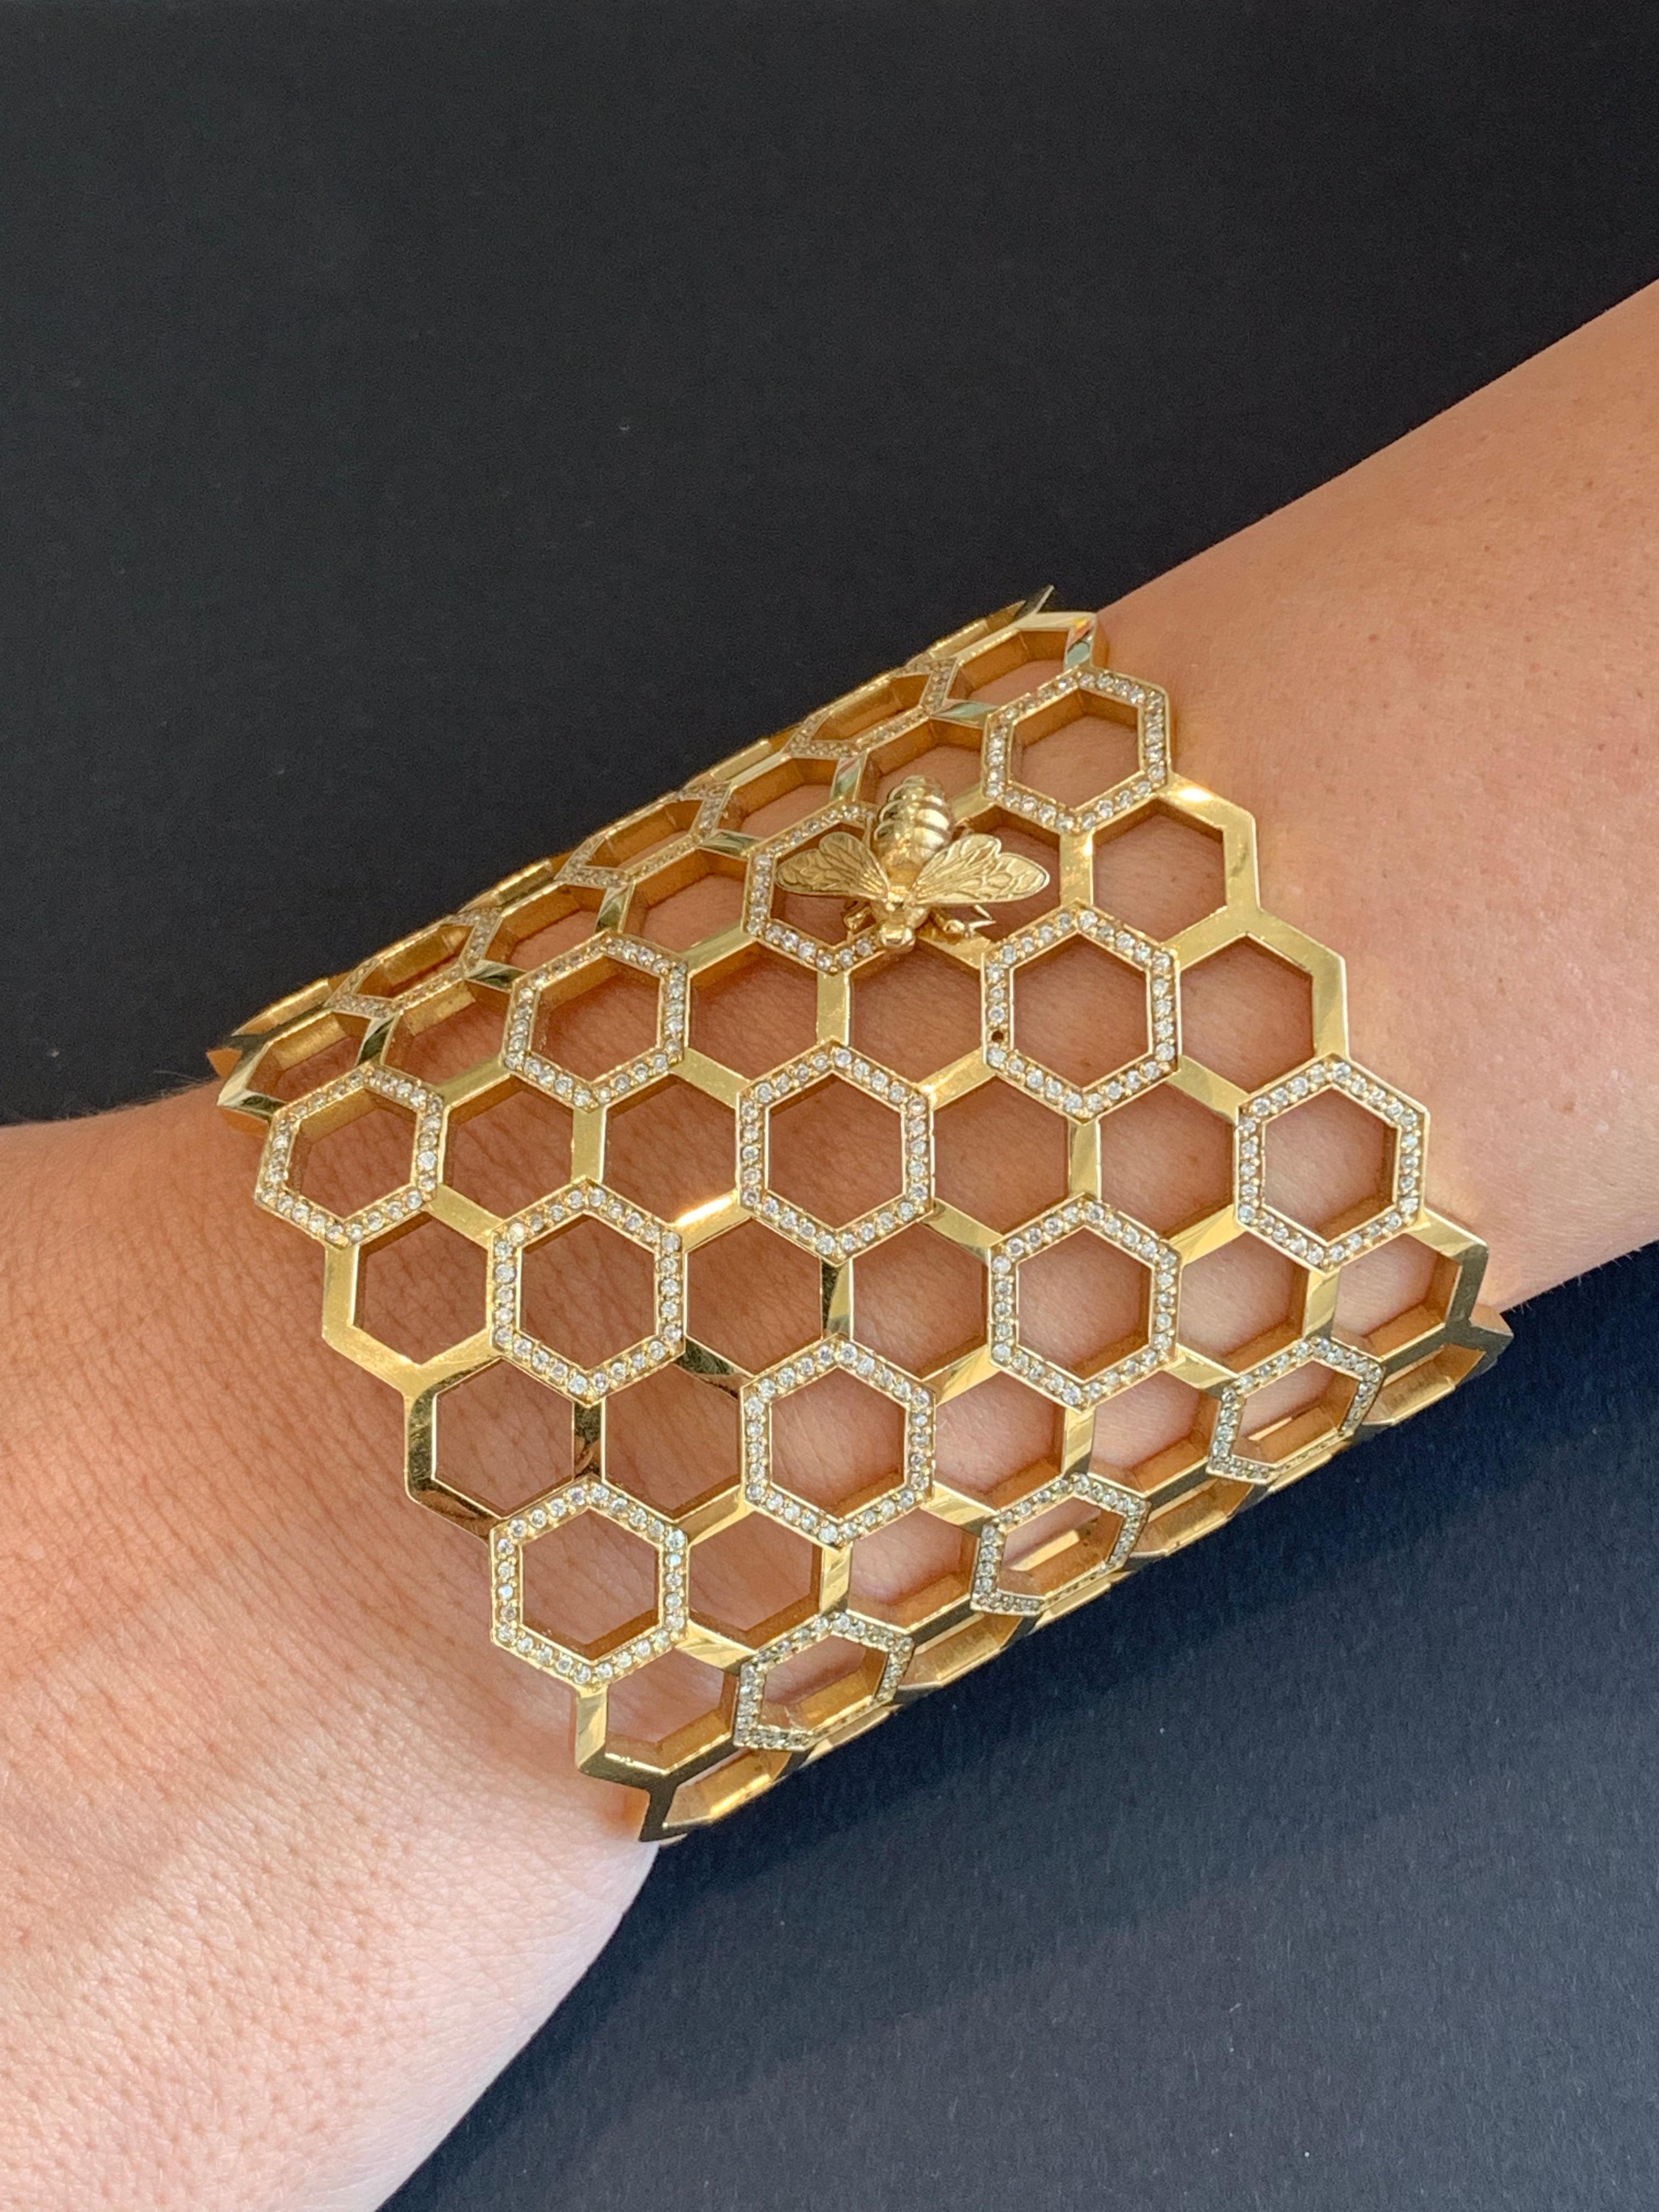 The Honeycomb Bee Cuff
White Diamonds set on Yellow Gold. Topped with Yellow Gold Honey Bee.
Crafted to order. Please allow up to 3 weeks for delivery.